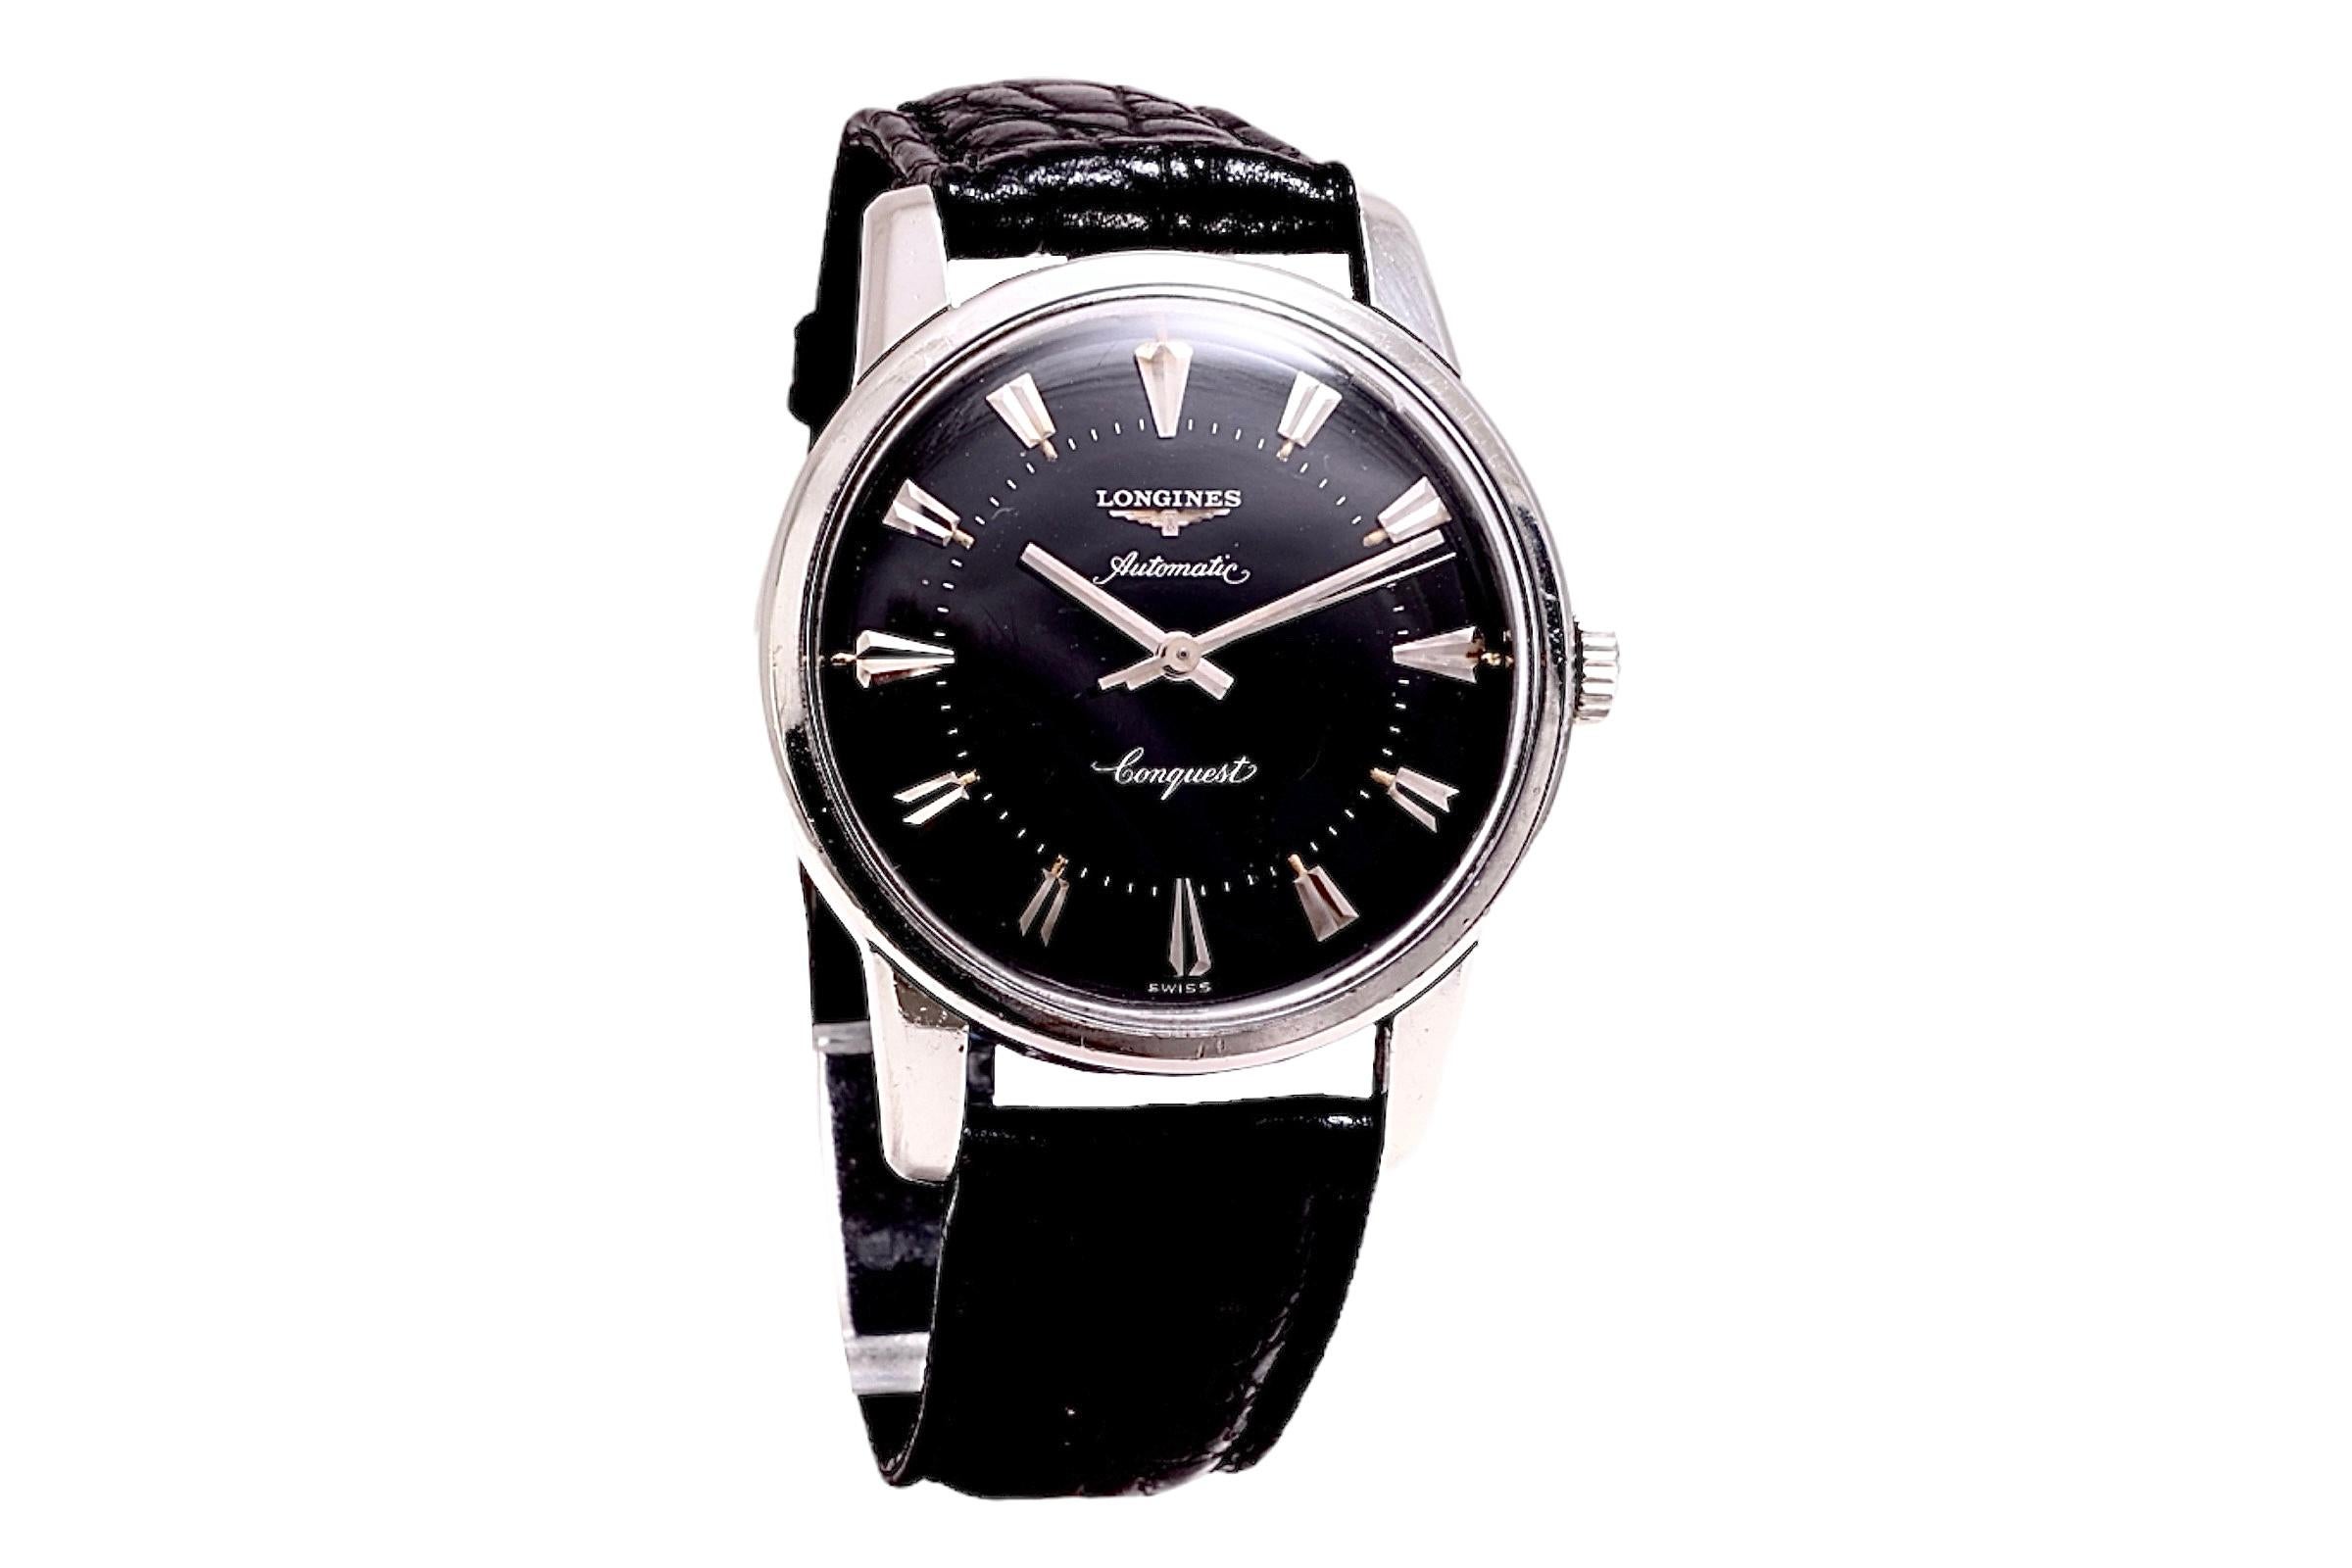 Steel Longines Conquest Automatic Collectors Wrist Watch, Reference 9000, Gilt Dial

Movement : Mechanical with Automatic winding , Caliber 19 AS

Case : Stainless Steel , 34.8 mm

Total weight including strap : 47.4 gram

Description
Longines